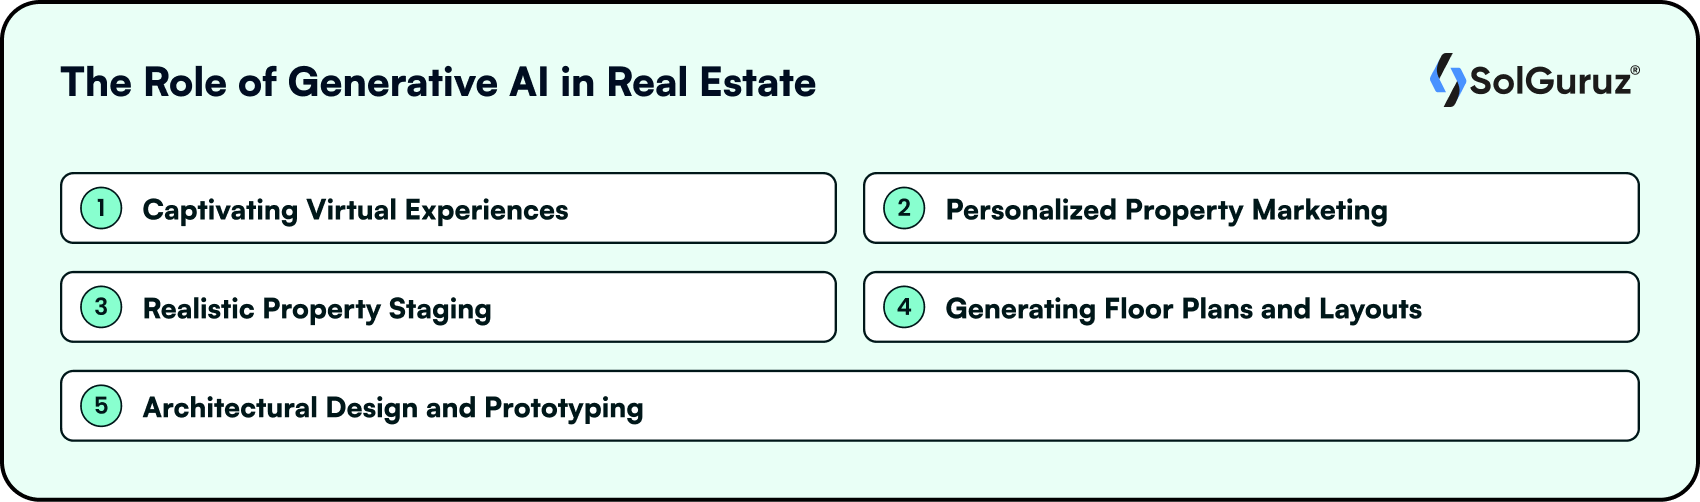 The Role of Generative AI in Real Estate